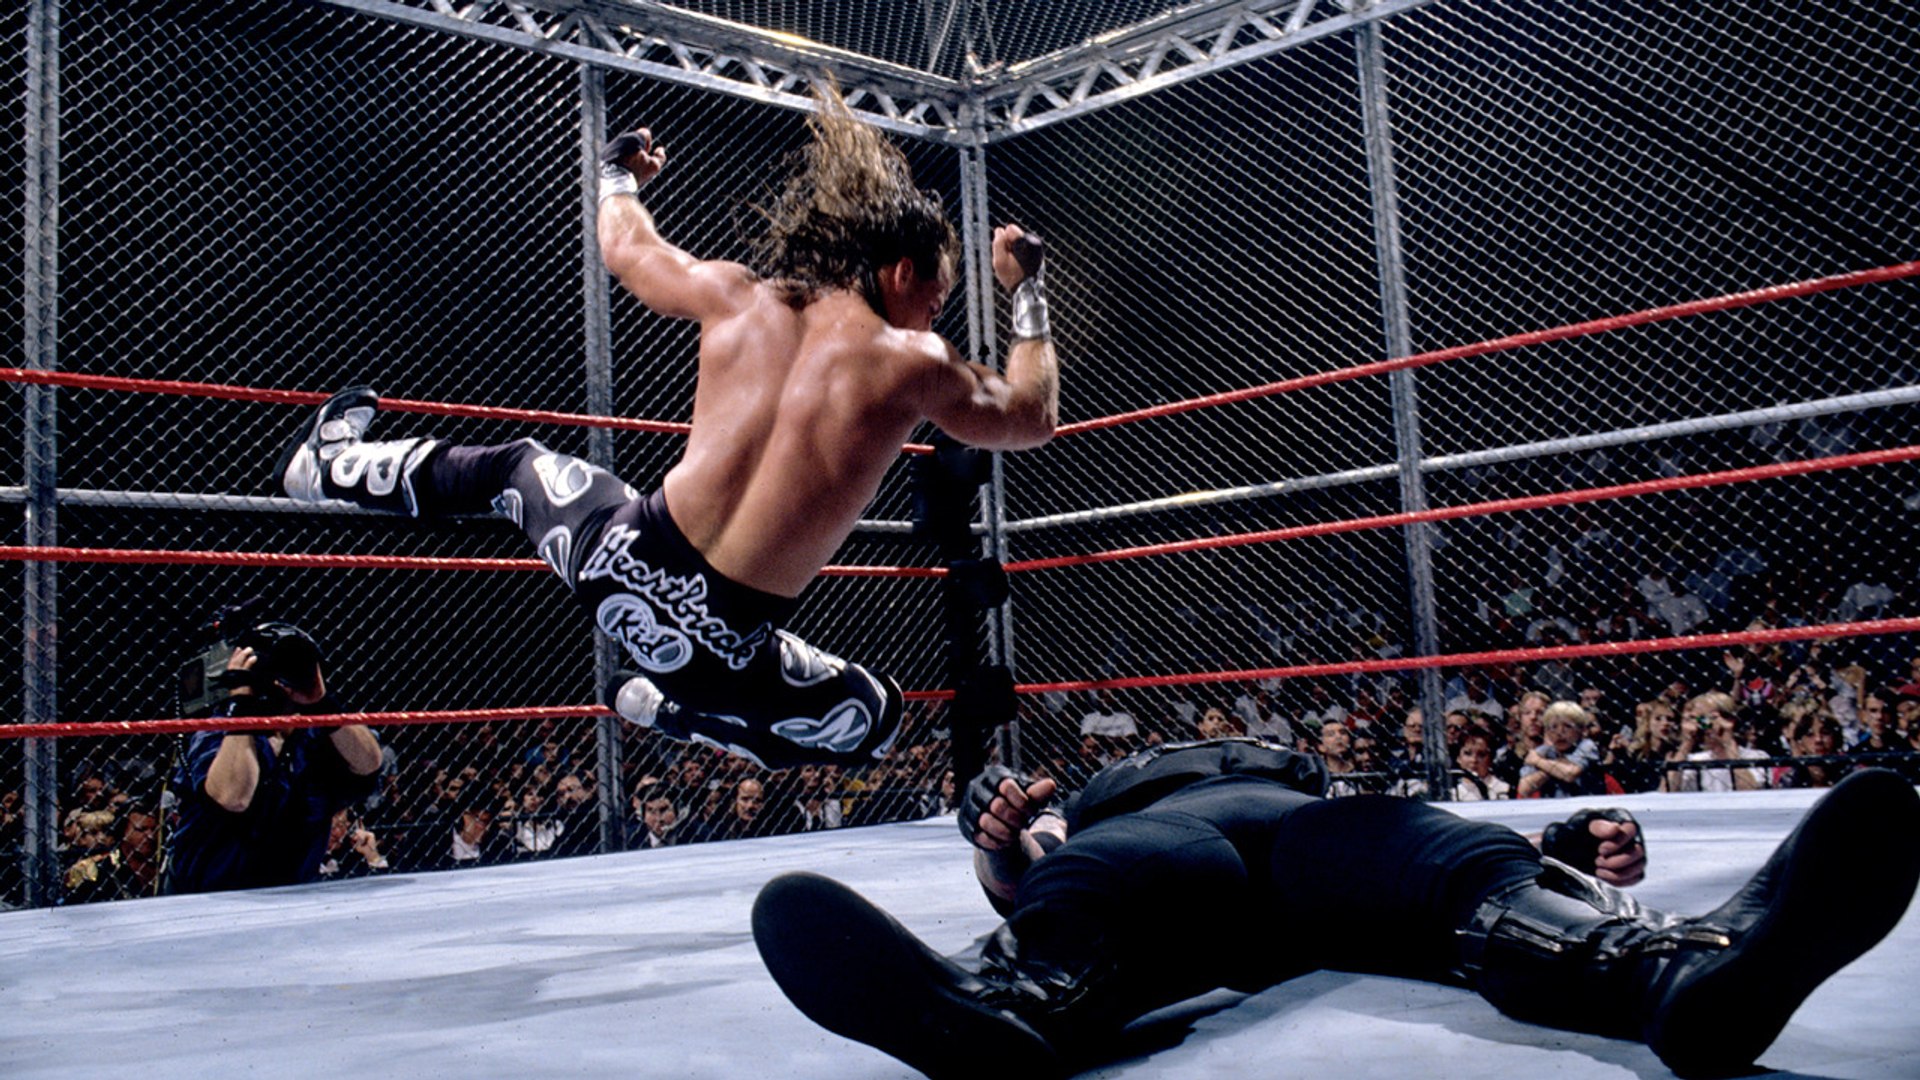 Undertaker Vs Shawn Michaels Hell In A Cell Match Wwf - Wwe Hbk Vs Undertaker Hell In A Cell , HD Wallpaper & Backgrounds